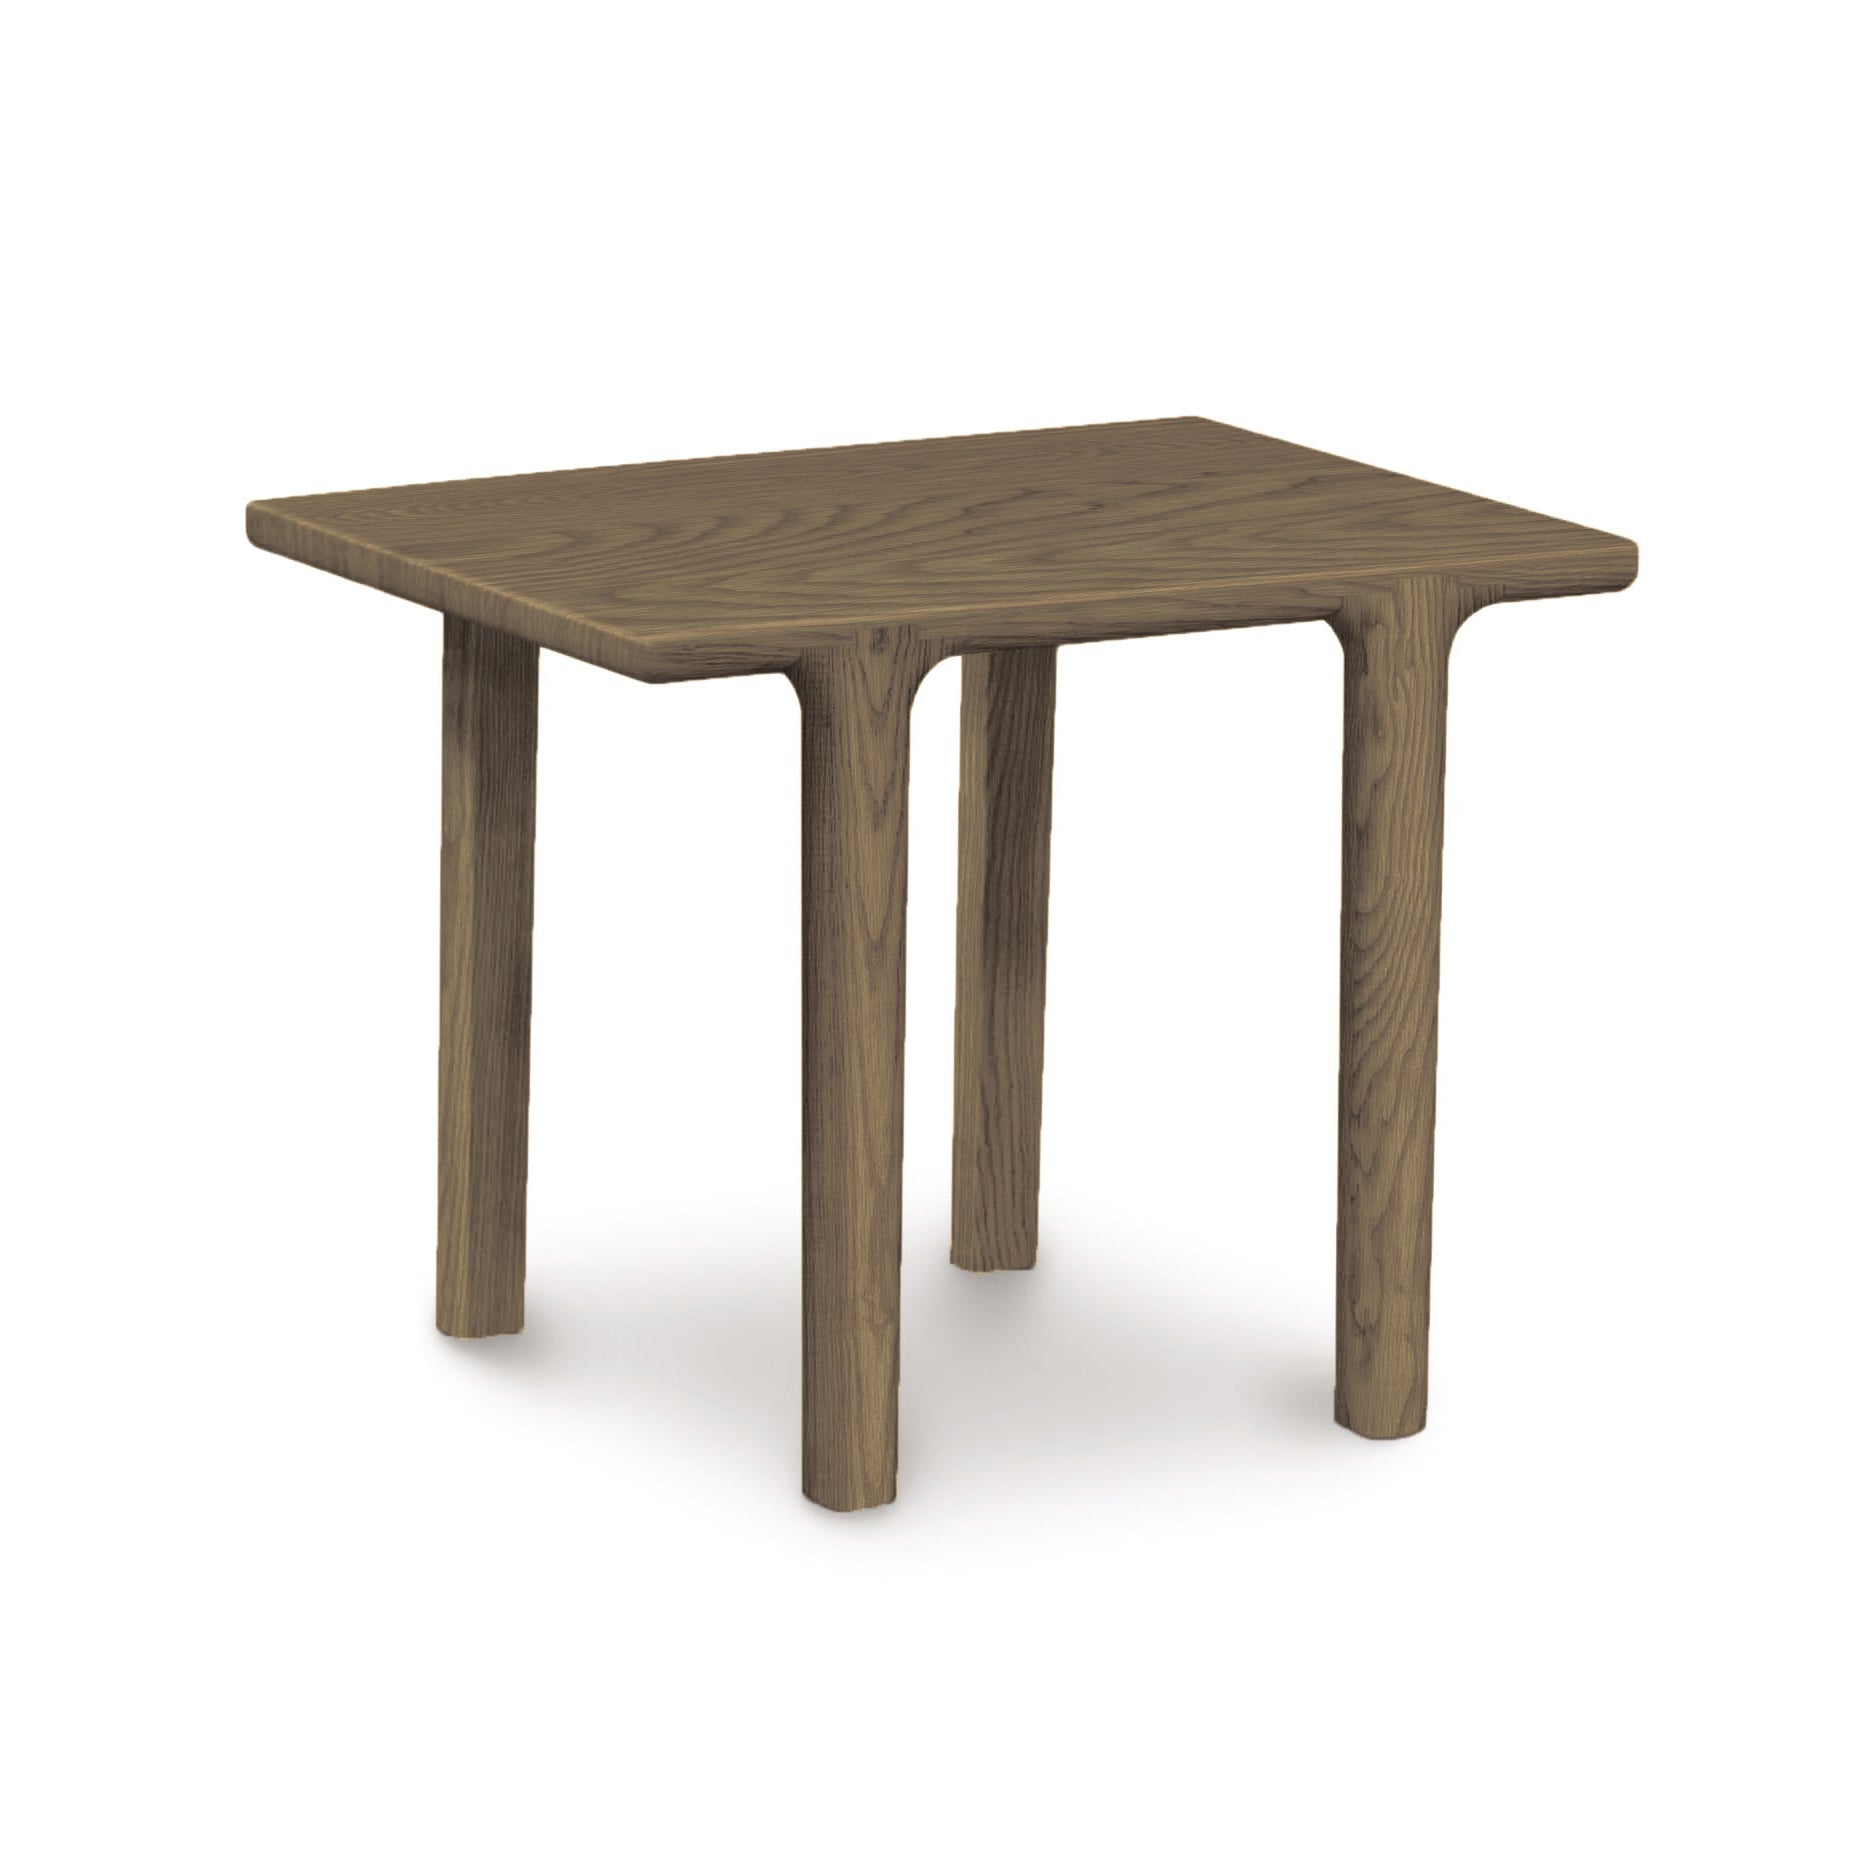 A solid Copeland Furniture Sierra Rectangular End Table with four legs on a plain background.